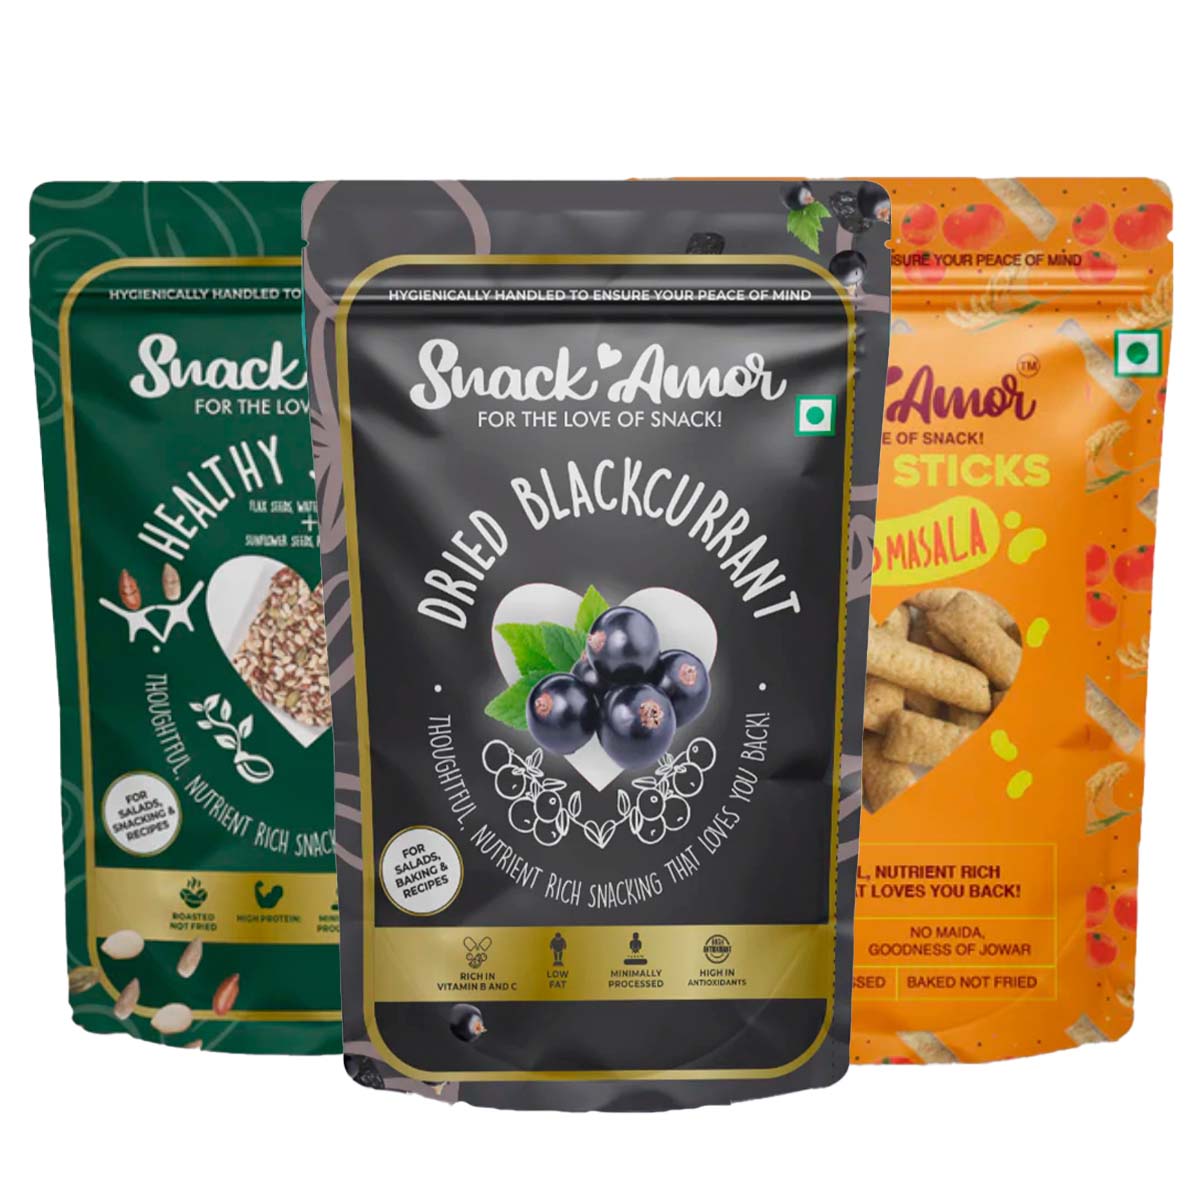 SnackAmor Combo Pack of Black Currant (100g) | Jowaar Sticks (50g) | Healthy Seed Mix ( 175g) | Healthy Combo Pack | High Protein & Fibre Snacks (Cashew + Moringa + Seed Mix)… - Snack Amor